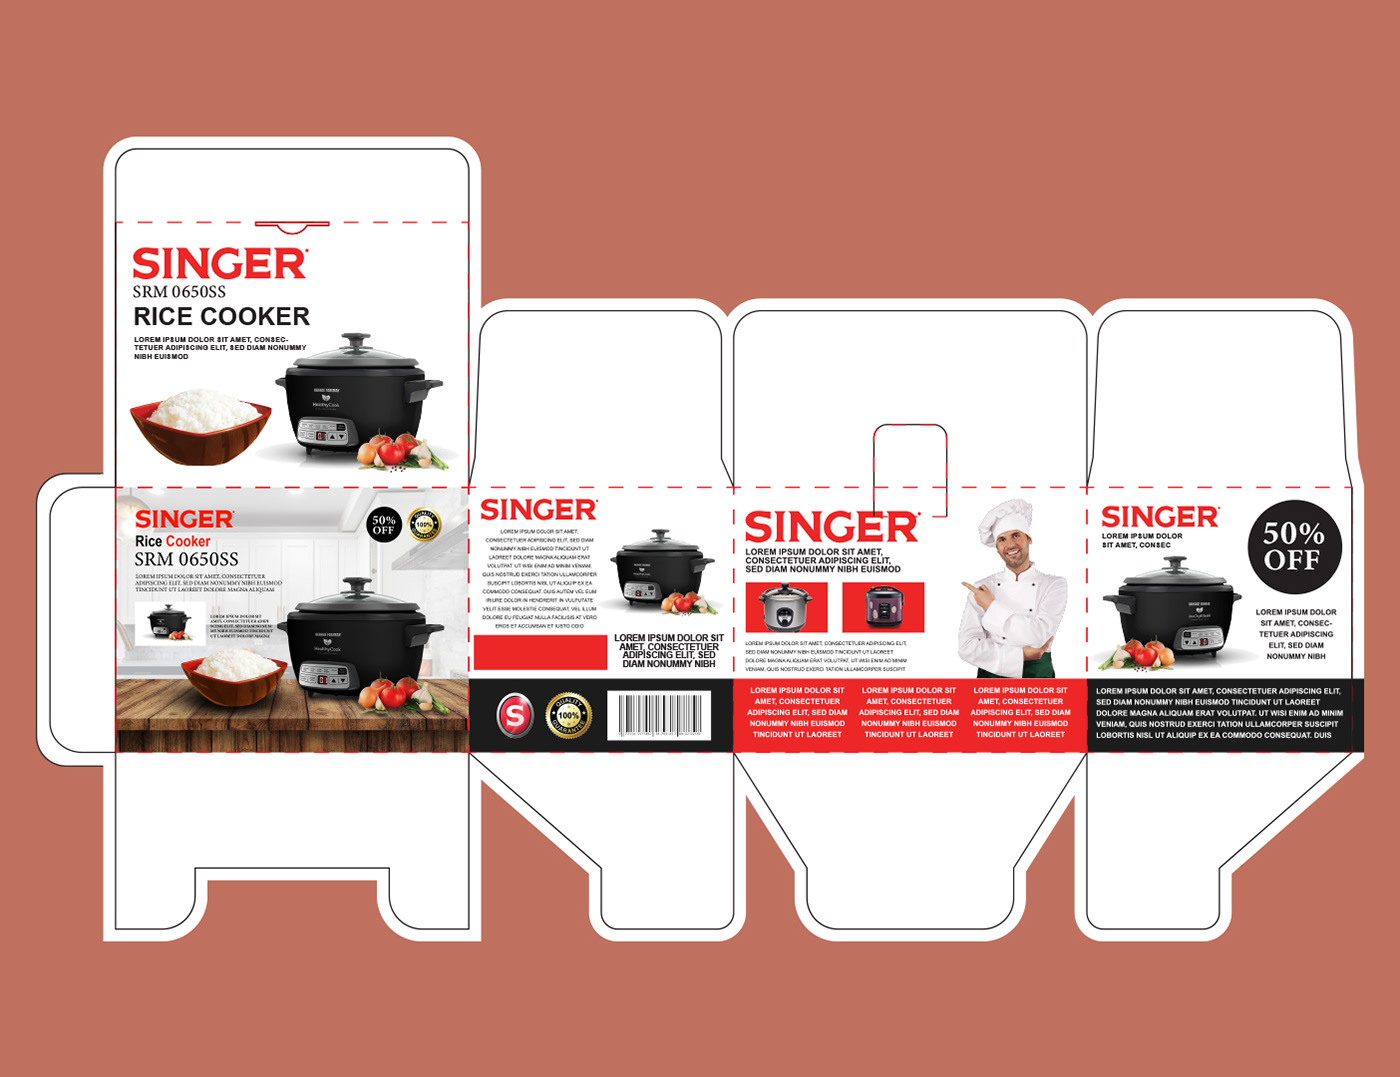 RICE COOKER / PACKAGING BOX / PRODUCT BOX DESIGN